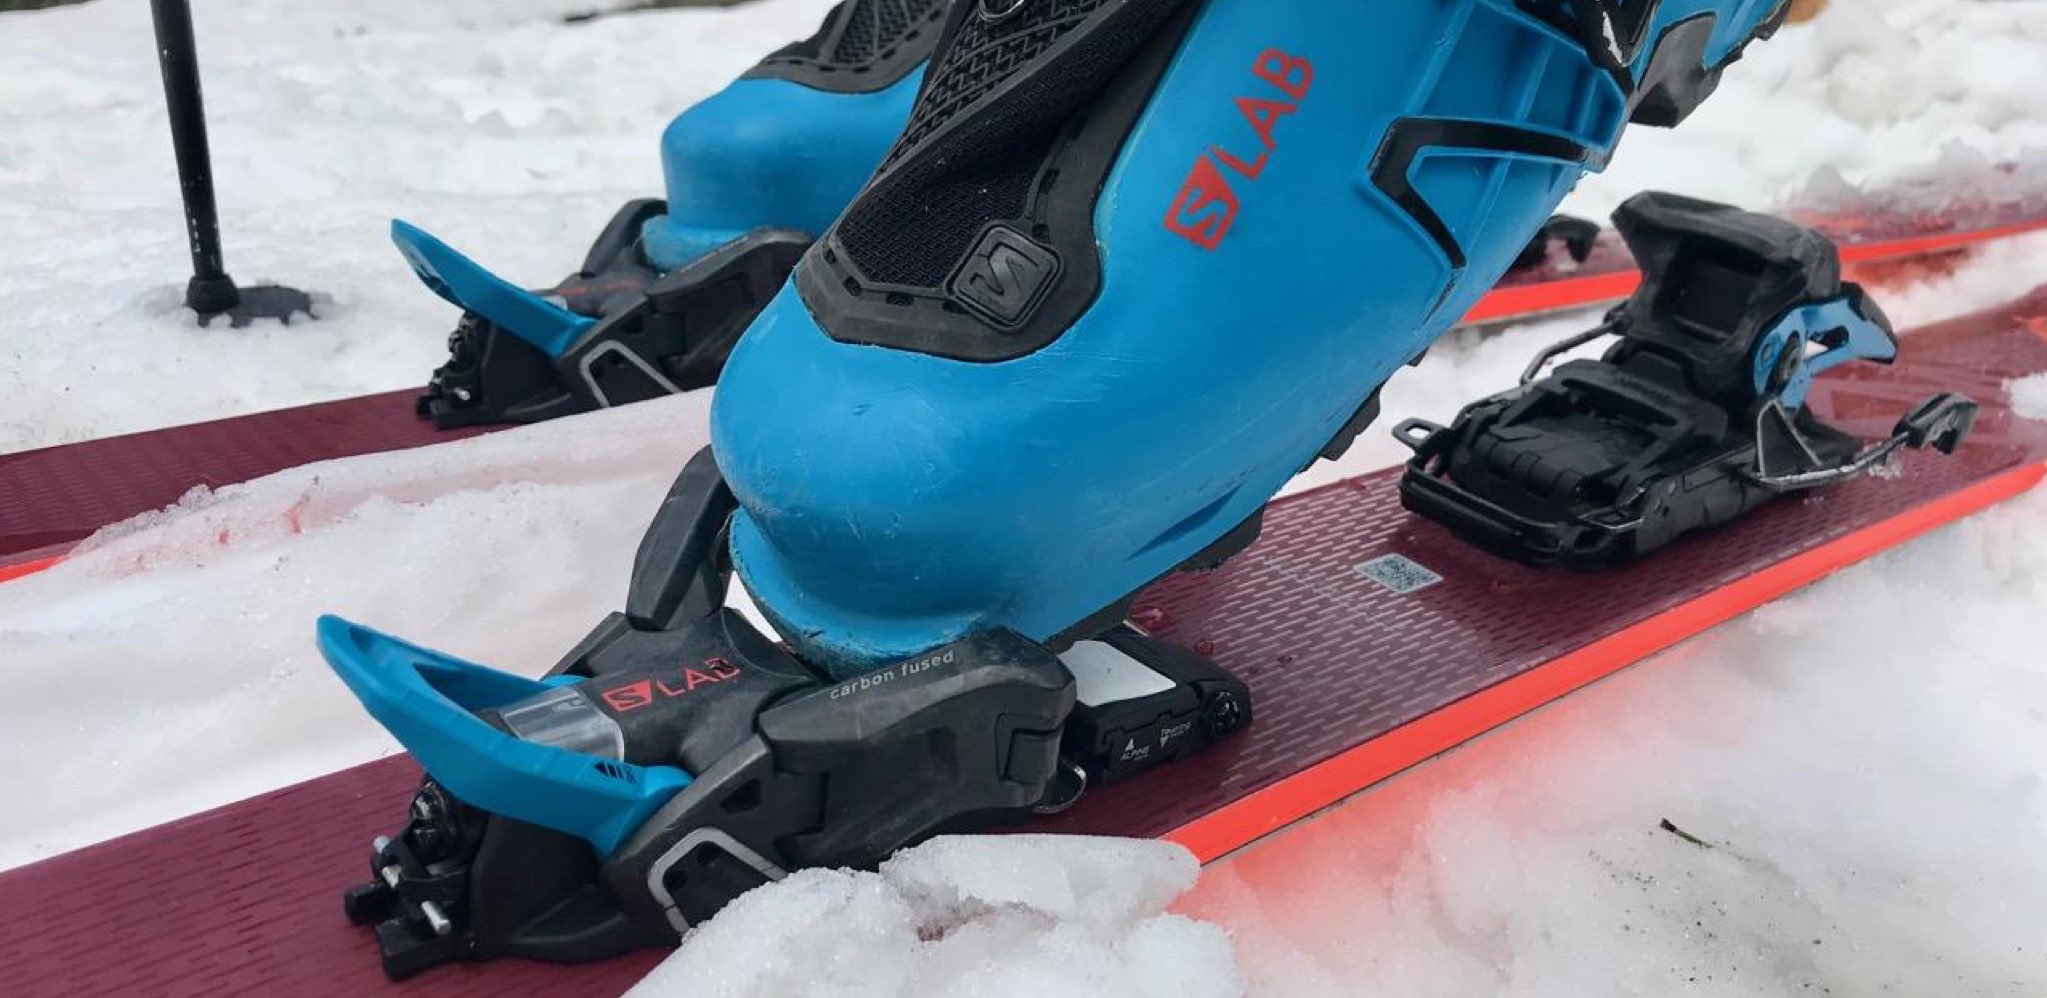 Butcher Stop by judge Reviewed: Salomon Shift Binding | Sawtooth Mountain Guides